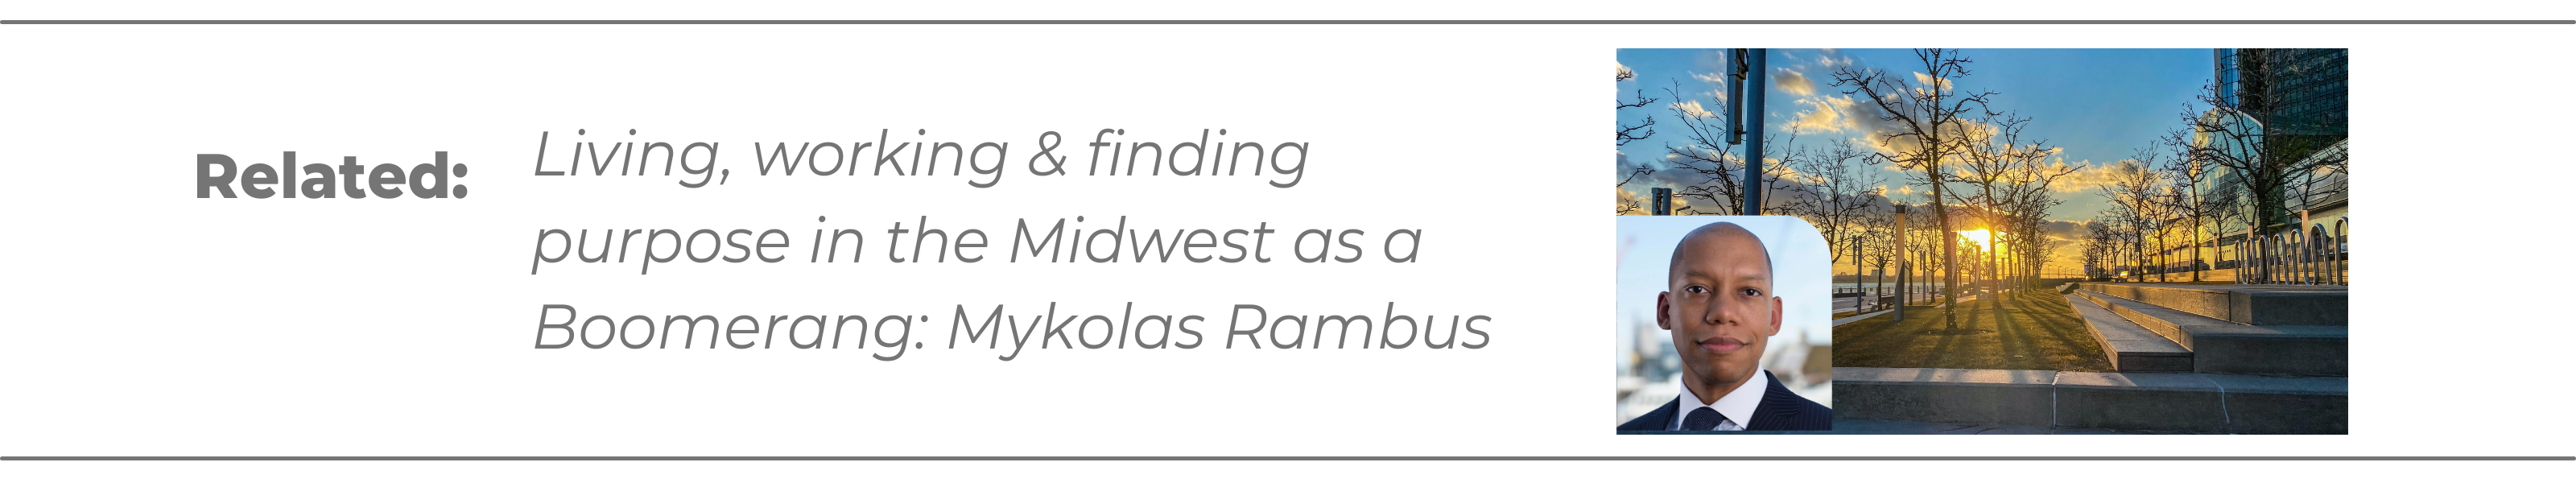 Living, working & finding purpose in the Midwest as a Boomerang: Mykolas Rambus